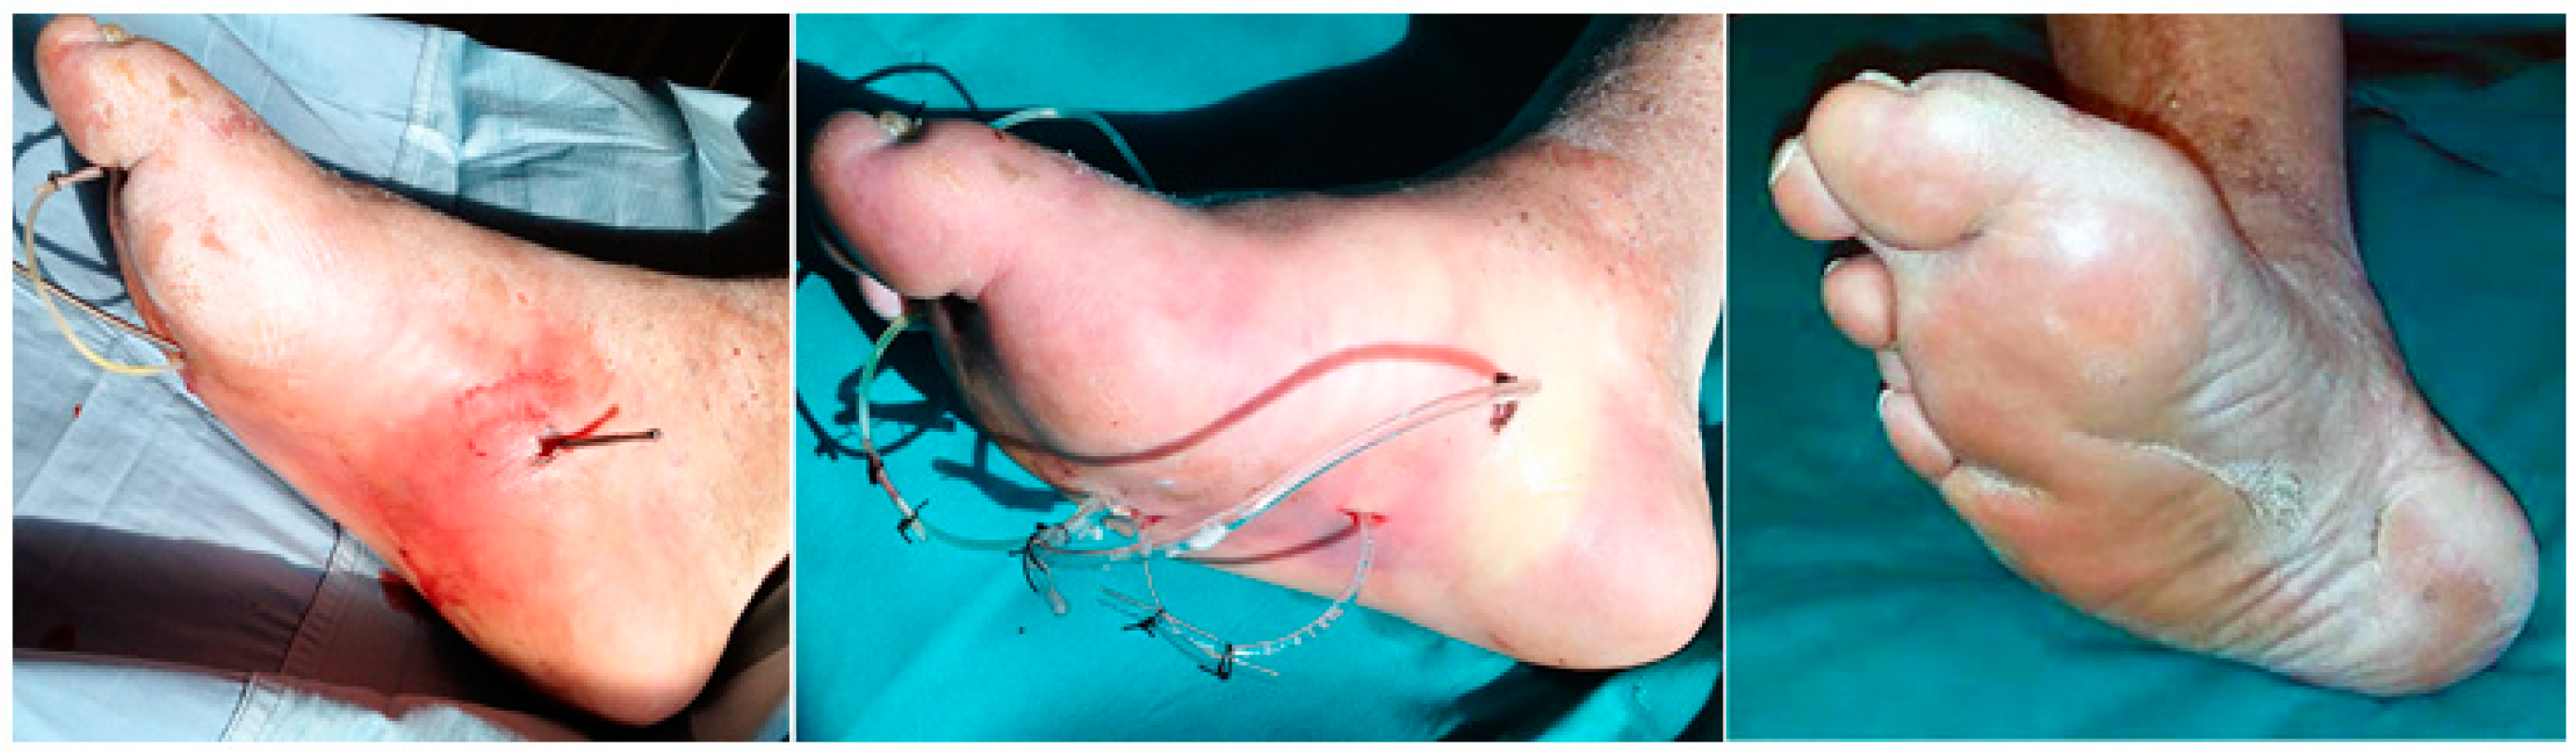 JCM | Free Full-Text | Diabetic Foot Infections: The Diagnostic Challenges